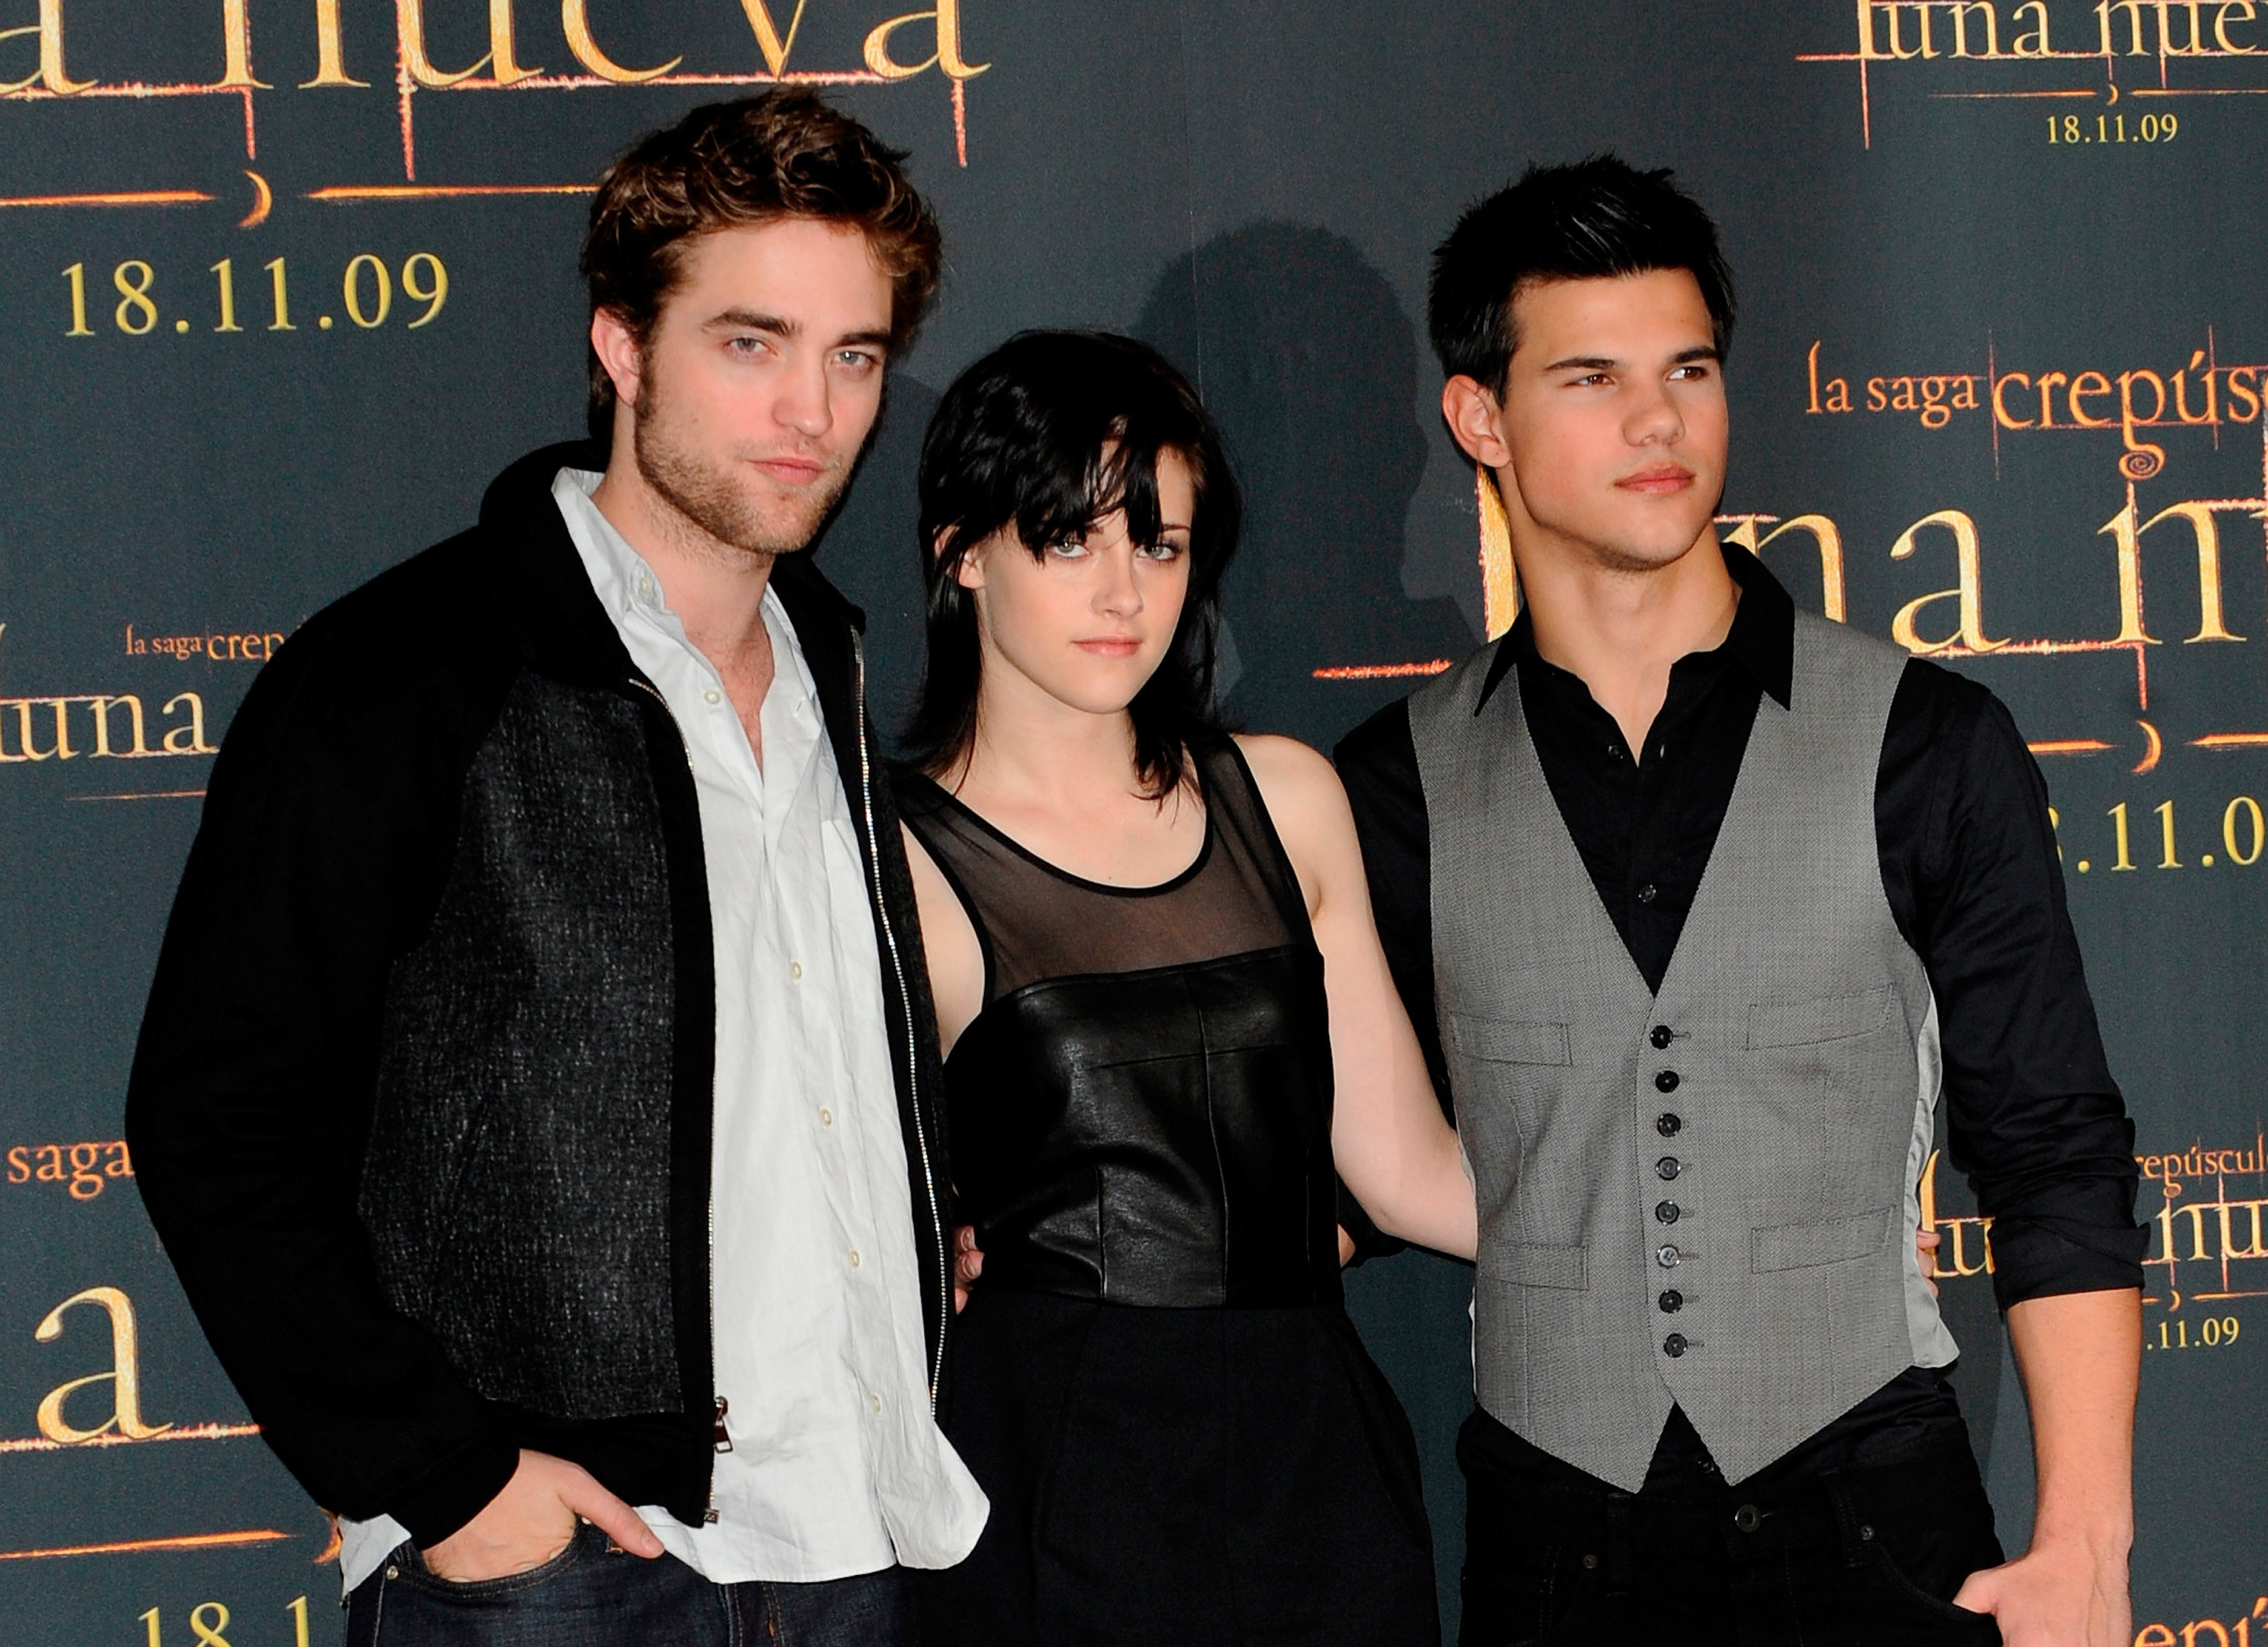 The Twilight cast at a premiere